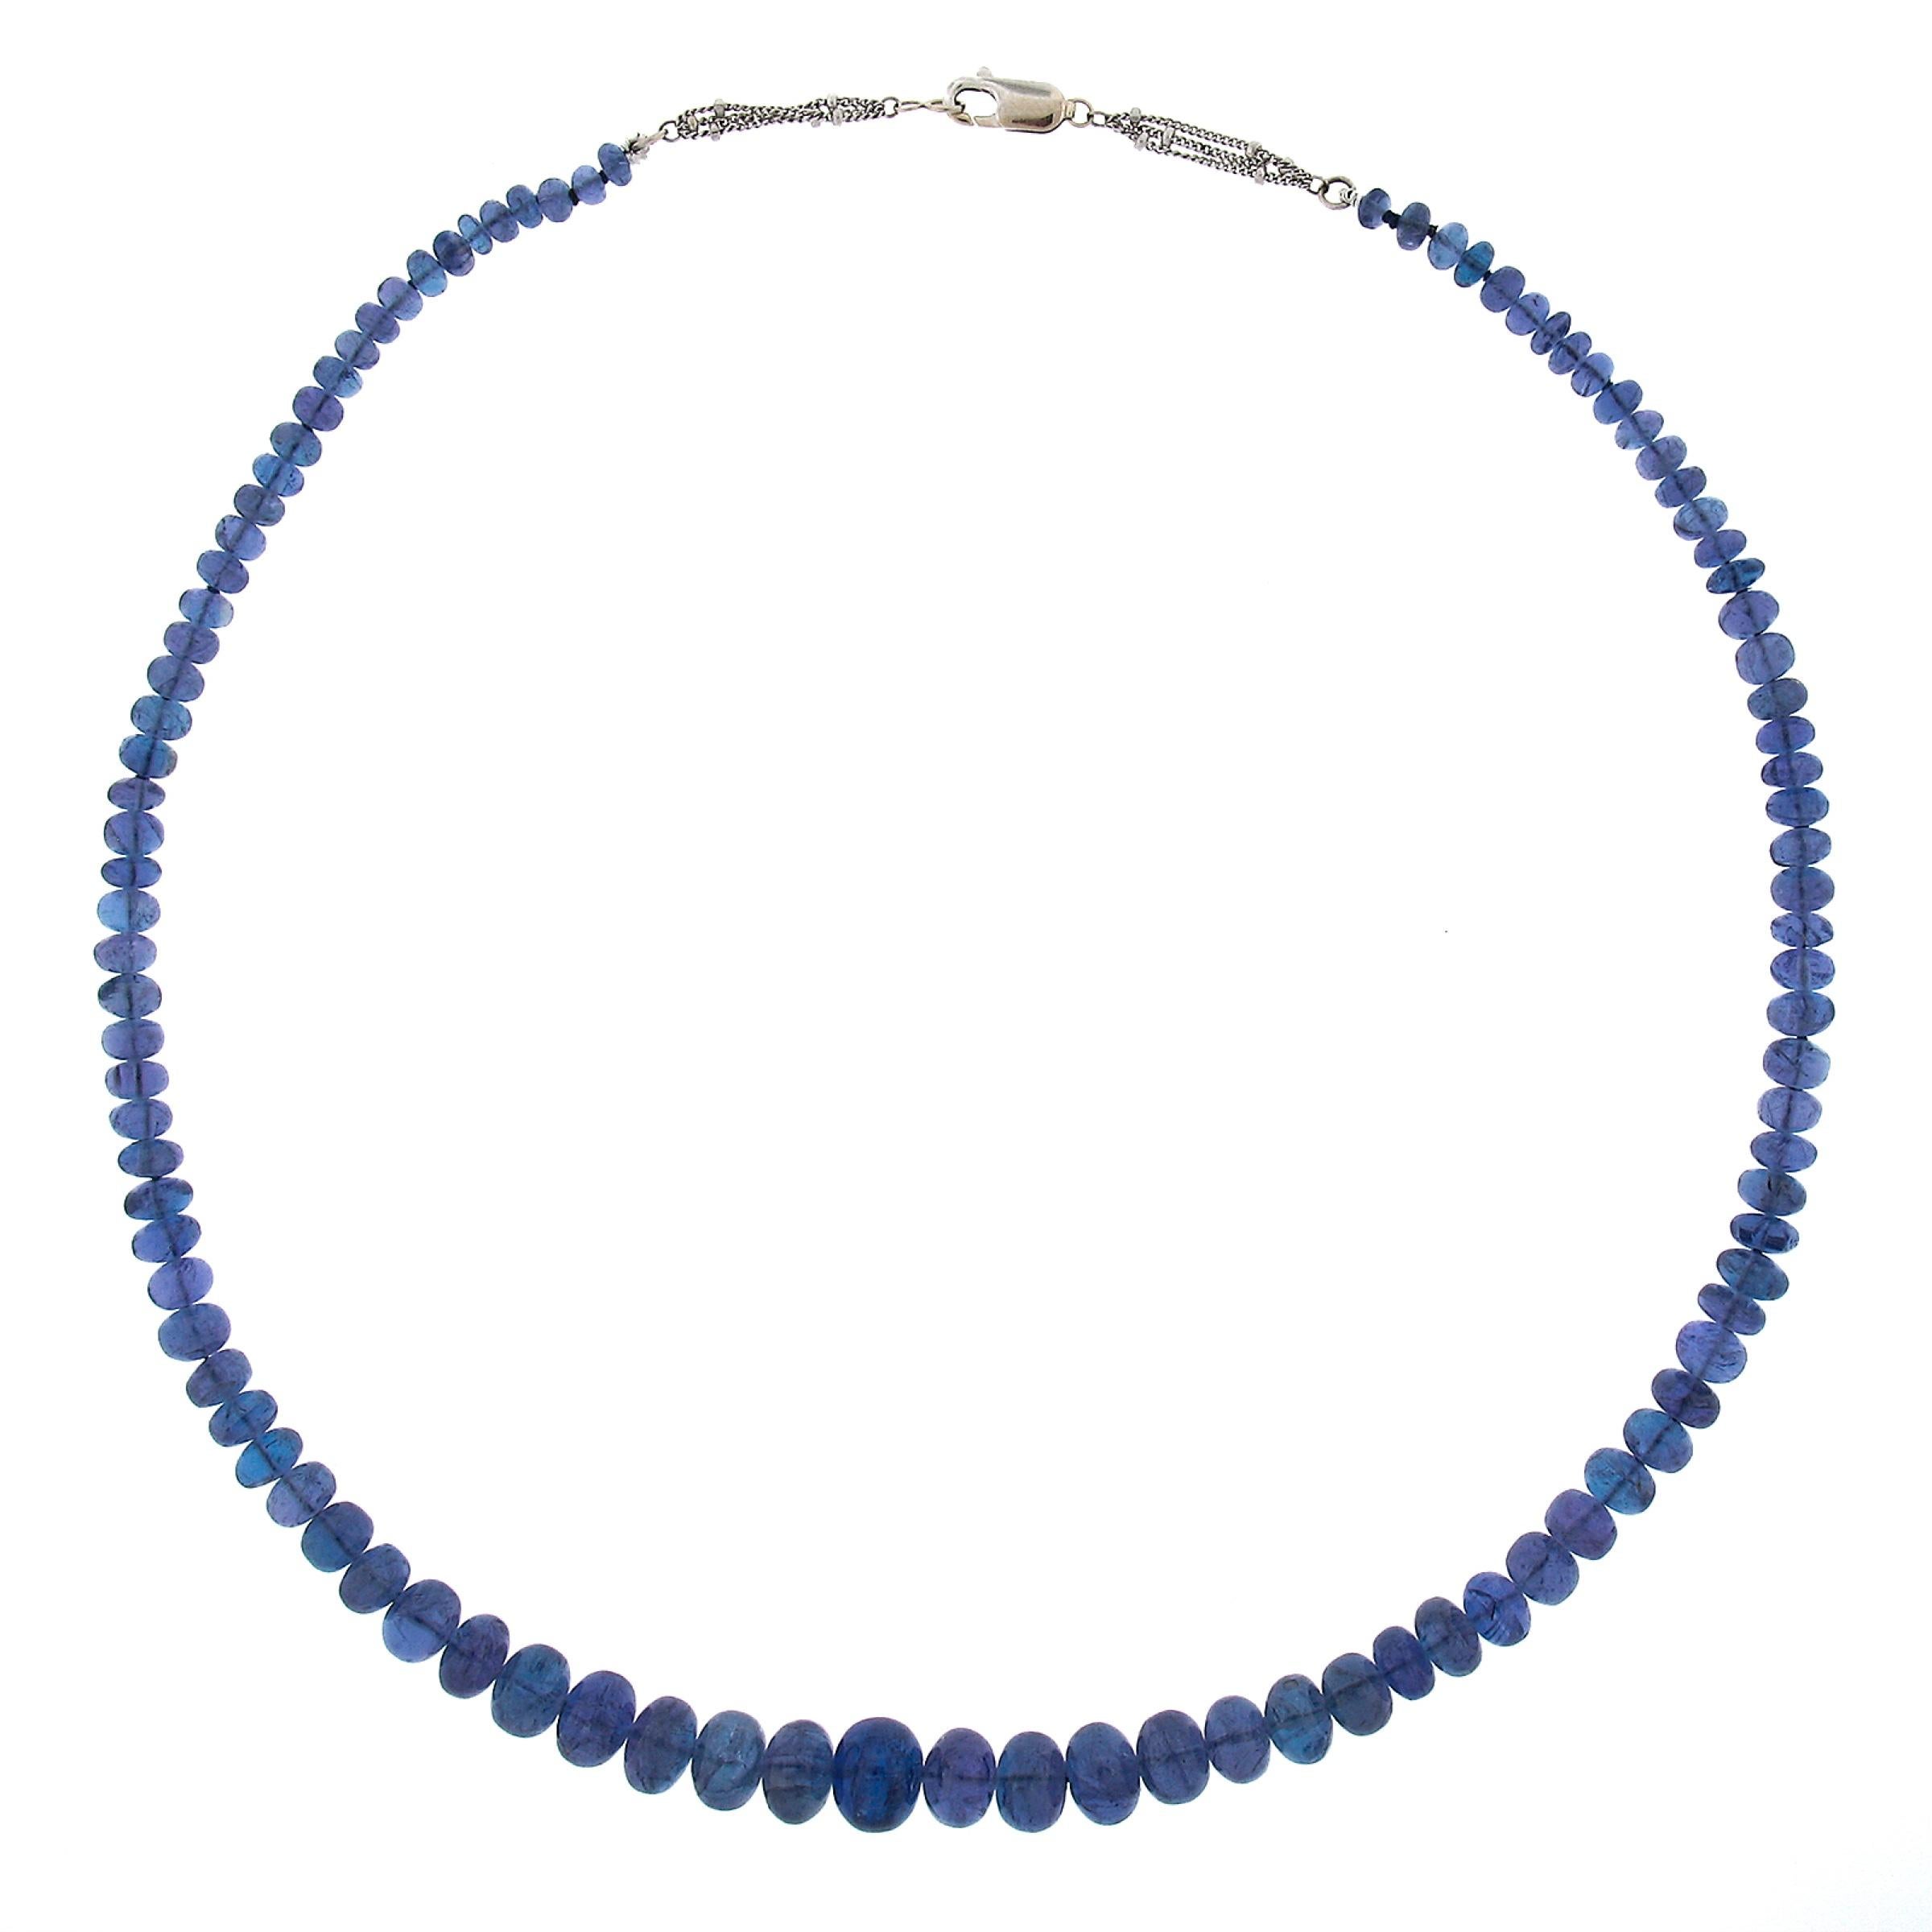 Women's or Men's GIA Rondelle Beads Tanzanite Graduated Strand Necklace w/ 14k Gold Chain & Clasp For Sale